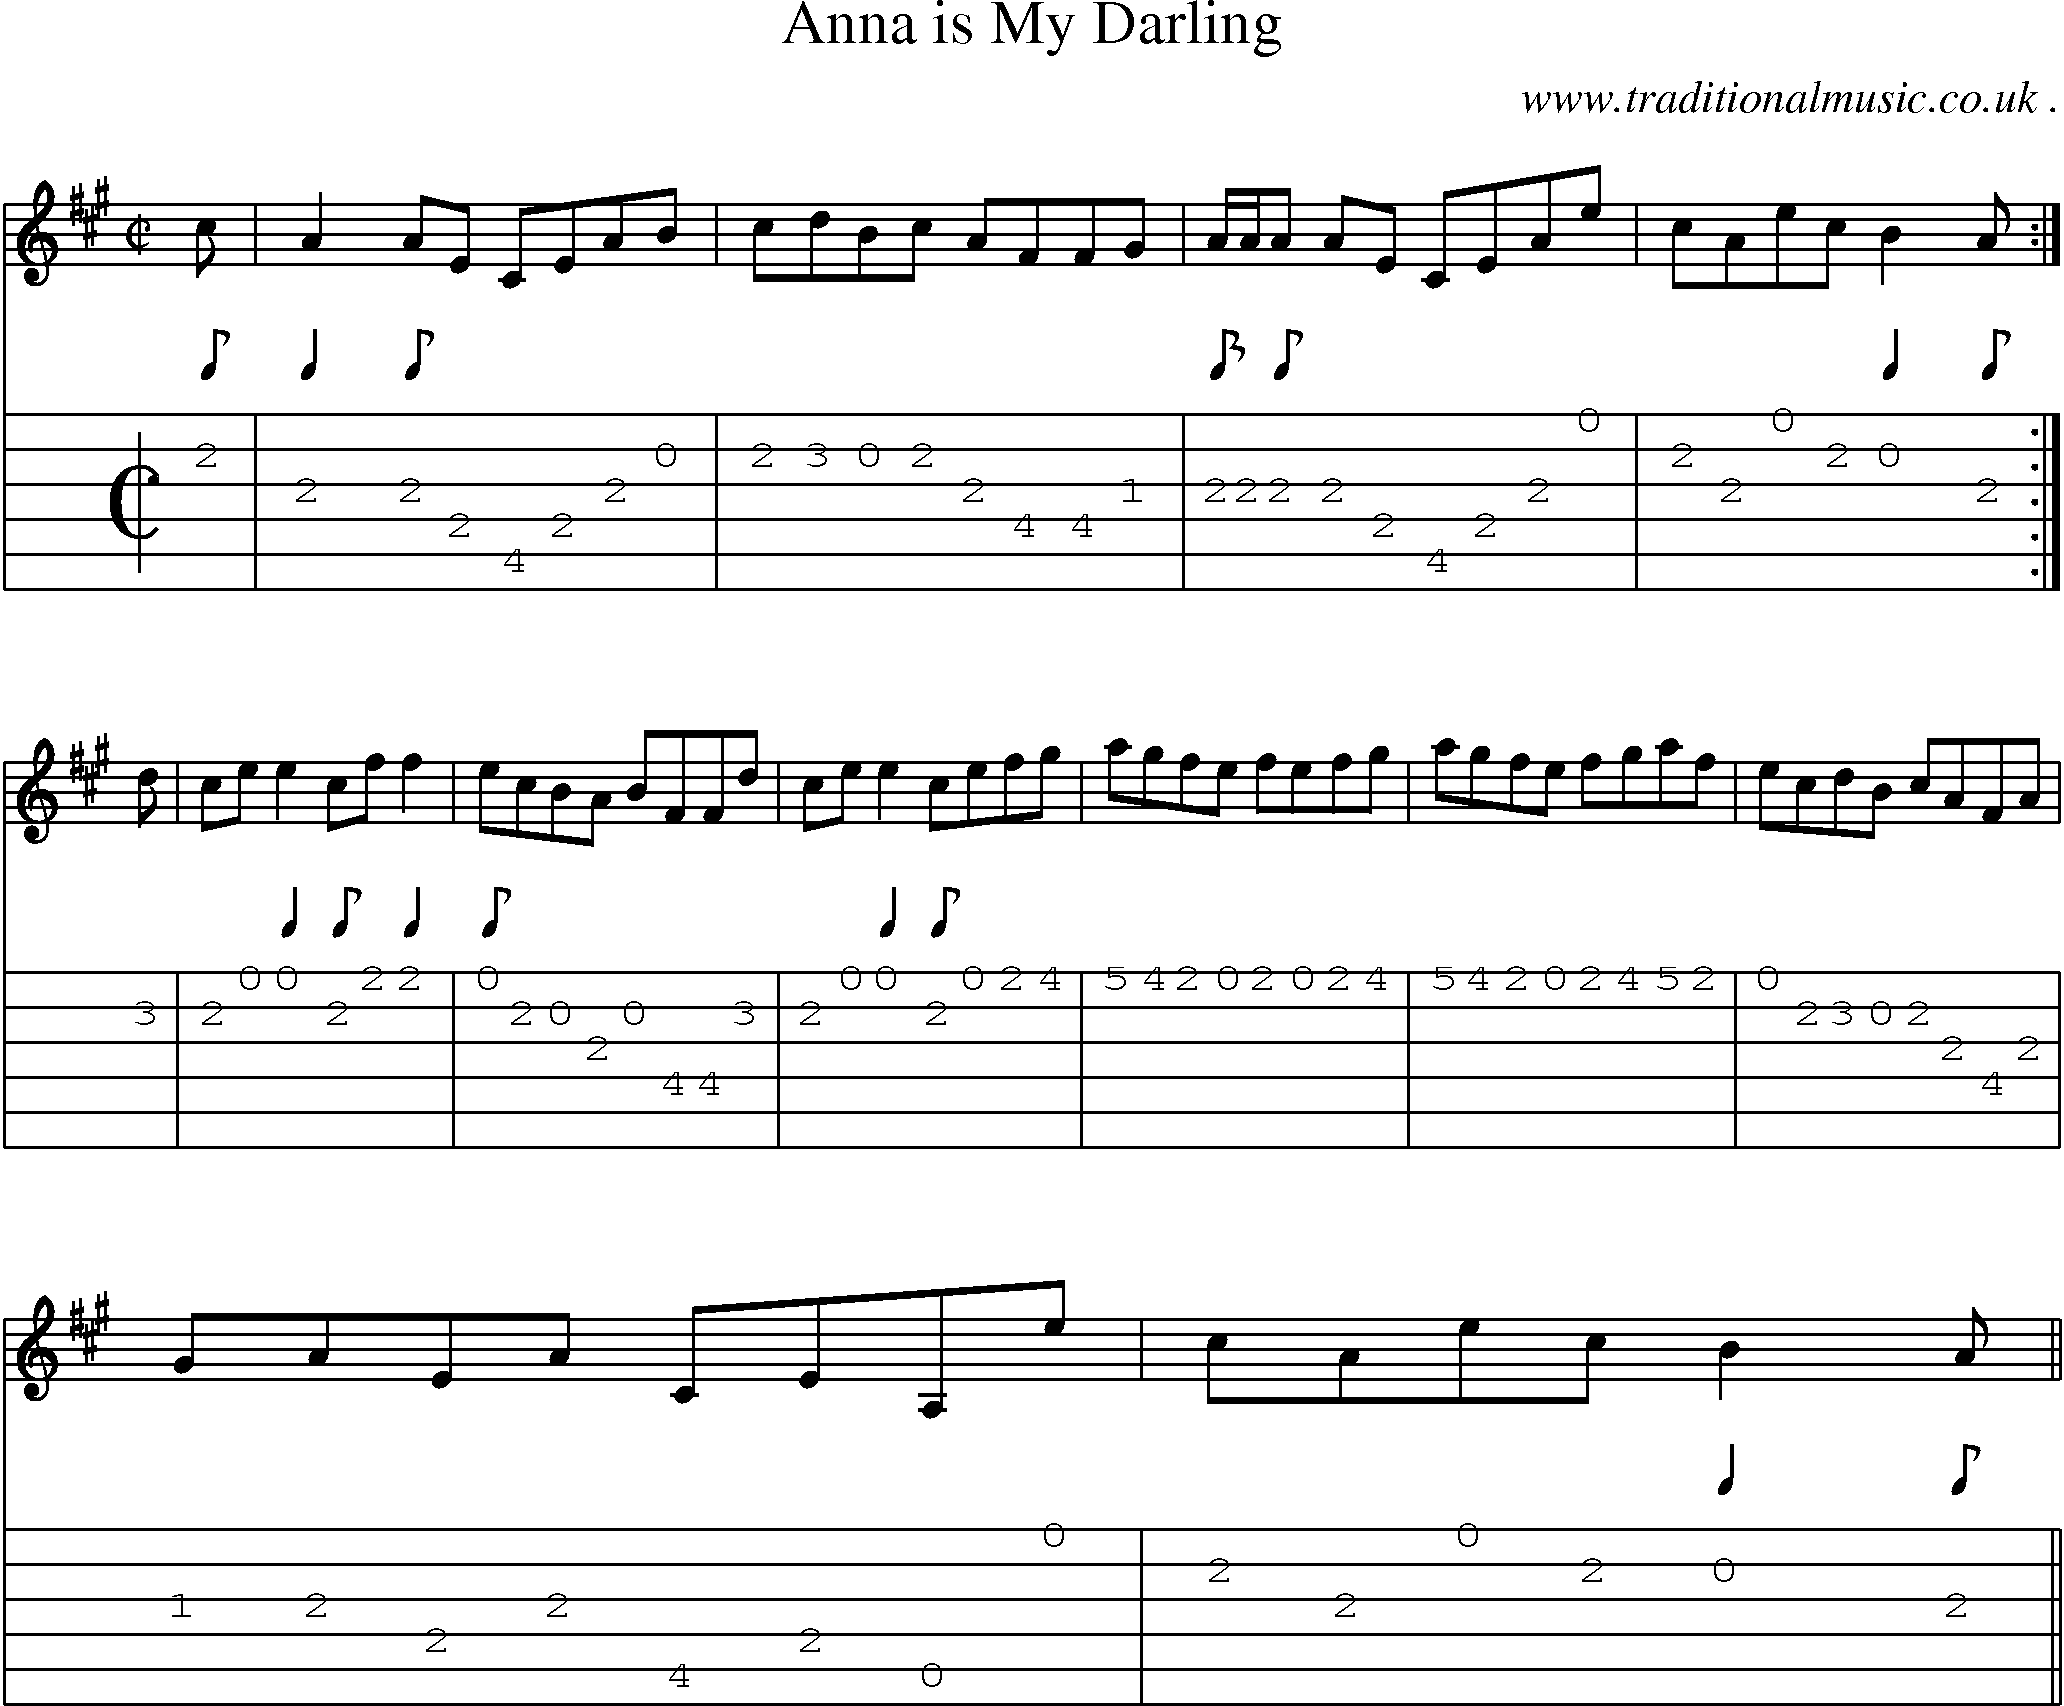 Sheet-music  score, Chords and Guitar Tabs for Anna Is My Darling